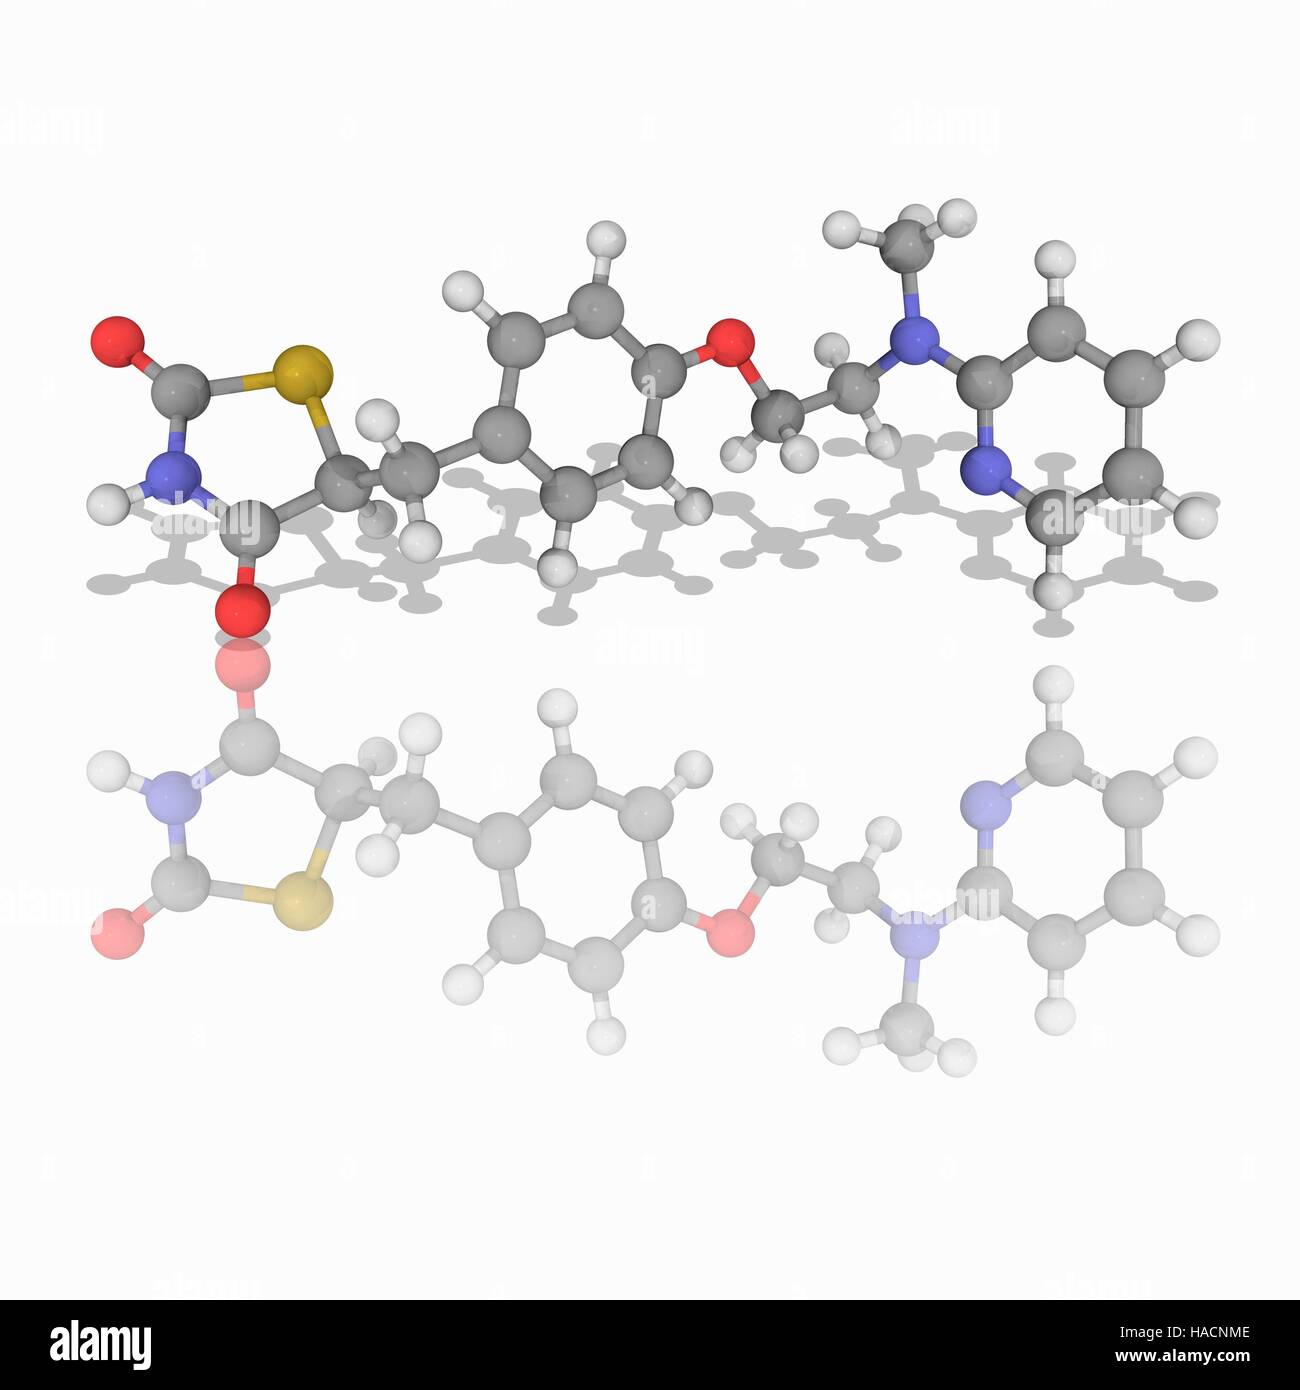 Rosiglitazone. Molecular model of the drug rosiglitazone (C18.H19.N3.O3.S), a thiazolidinedione class anti-diabetic drug used as an insulin sensitizer. Atoms are represented as spheres and are colour-coded: carbon (grey), hydrogen (white), nitrogen (blue), oxygen (red) and sulphur (yellow). Illustration. Stock Photo